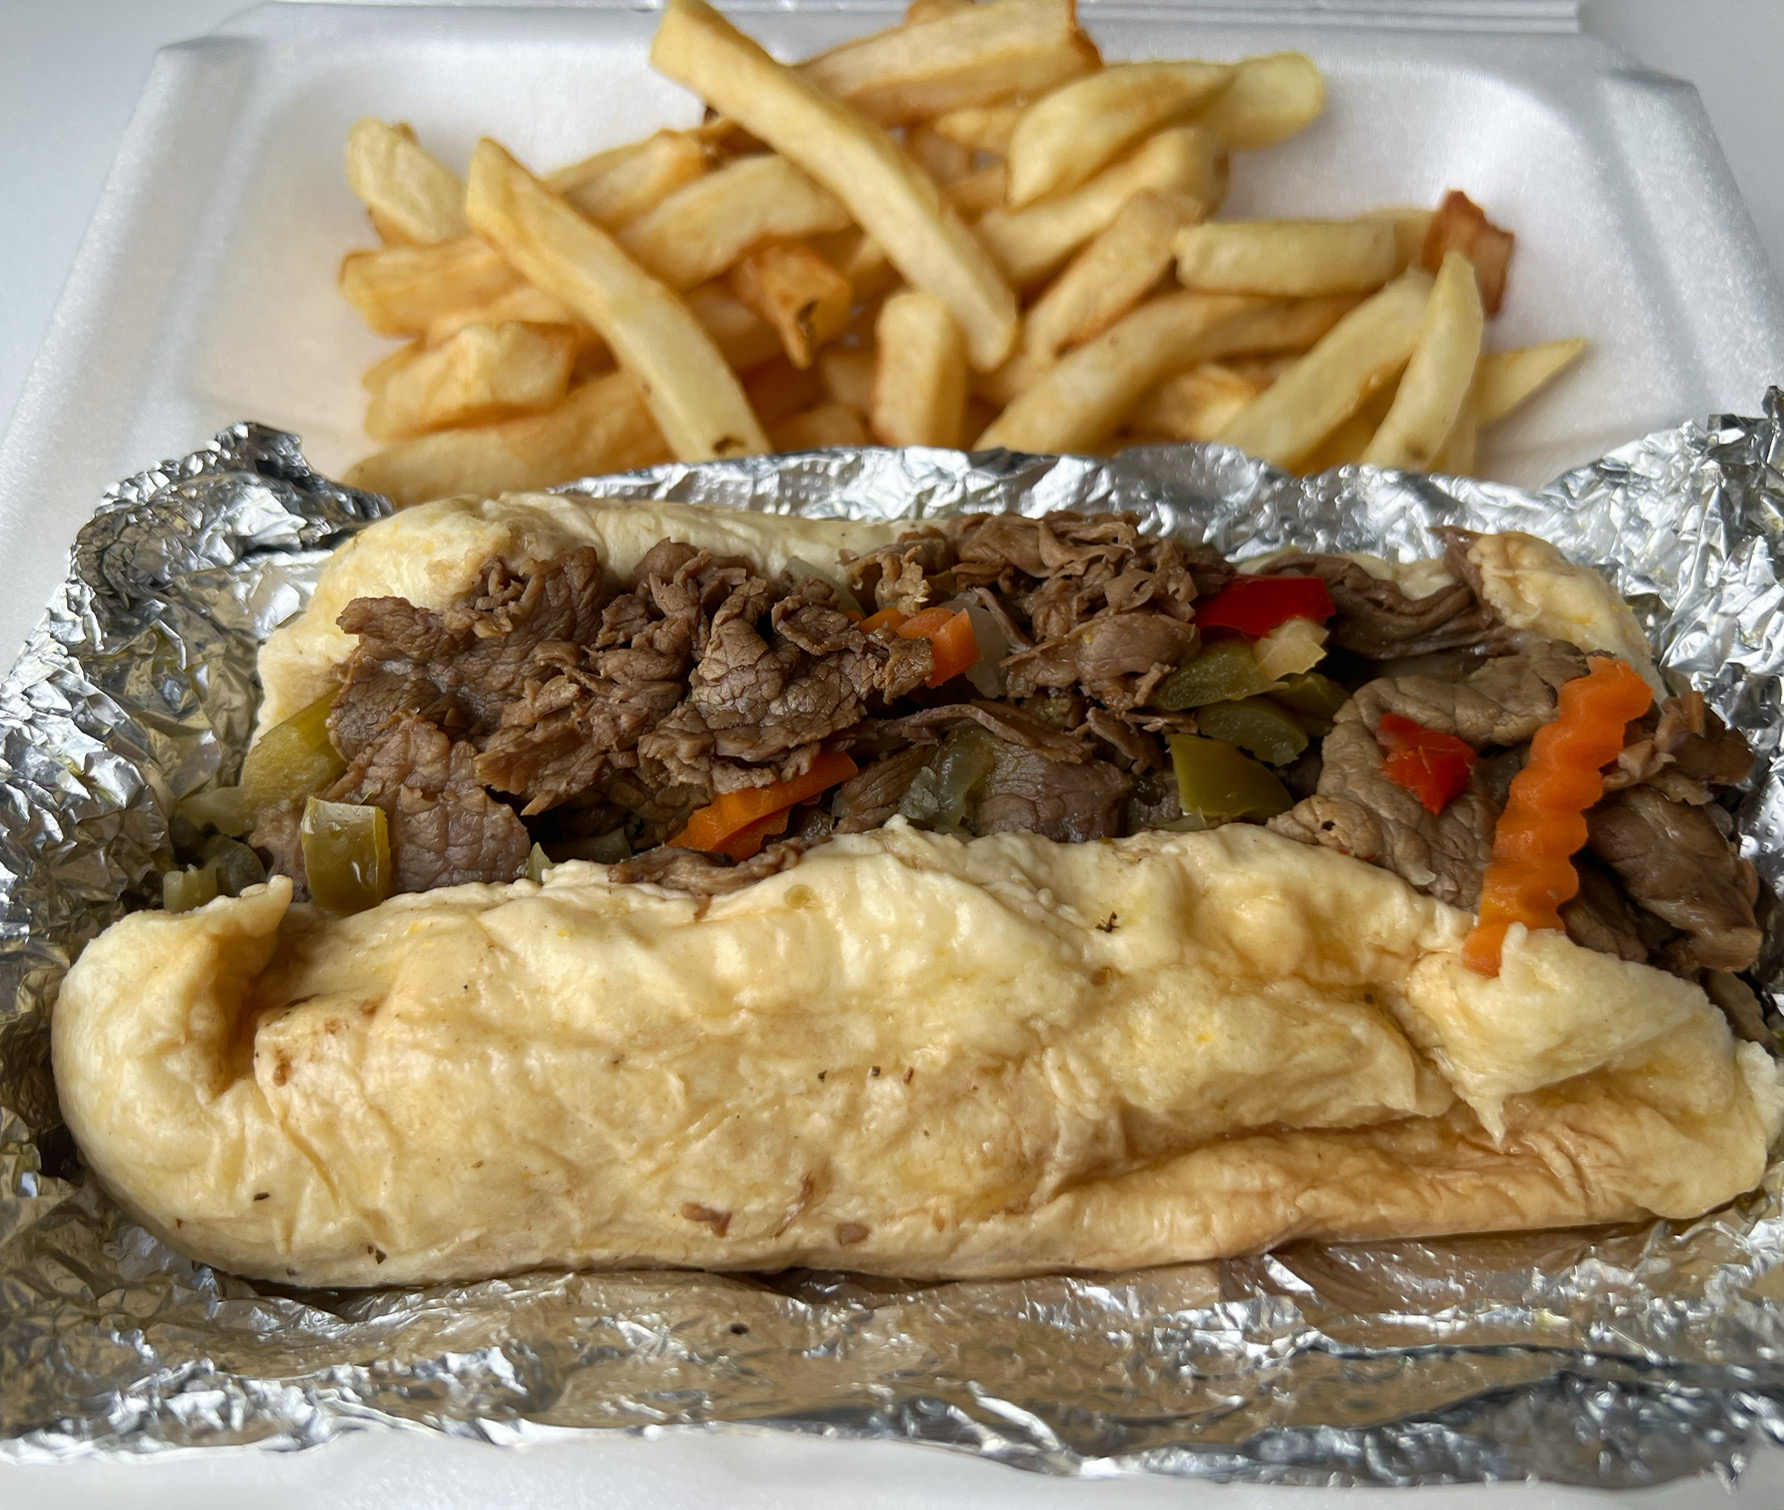 Unwrapped from foil but resting on top is an Italian beef sandwich from Garro's Taste of the City. Photo by Alyssa Buckley.